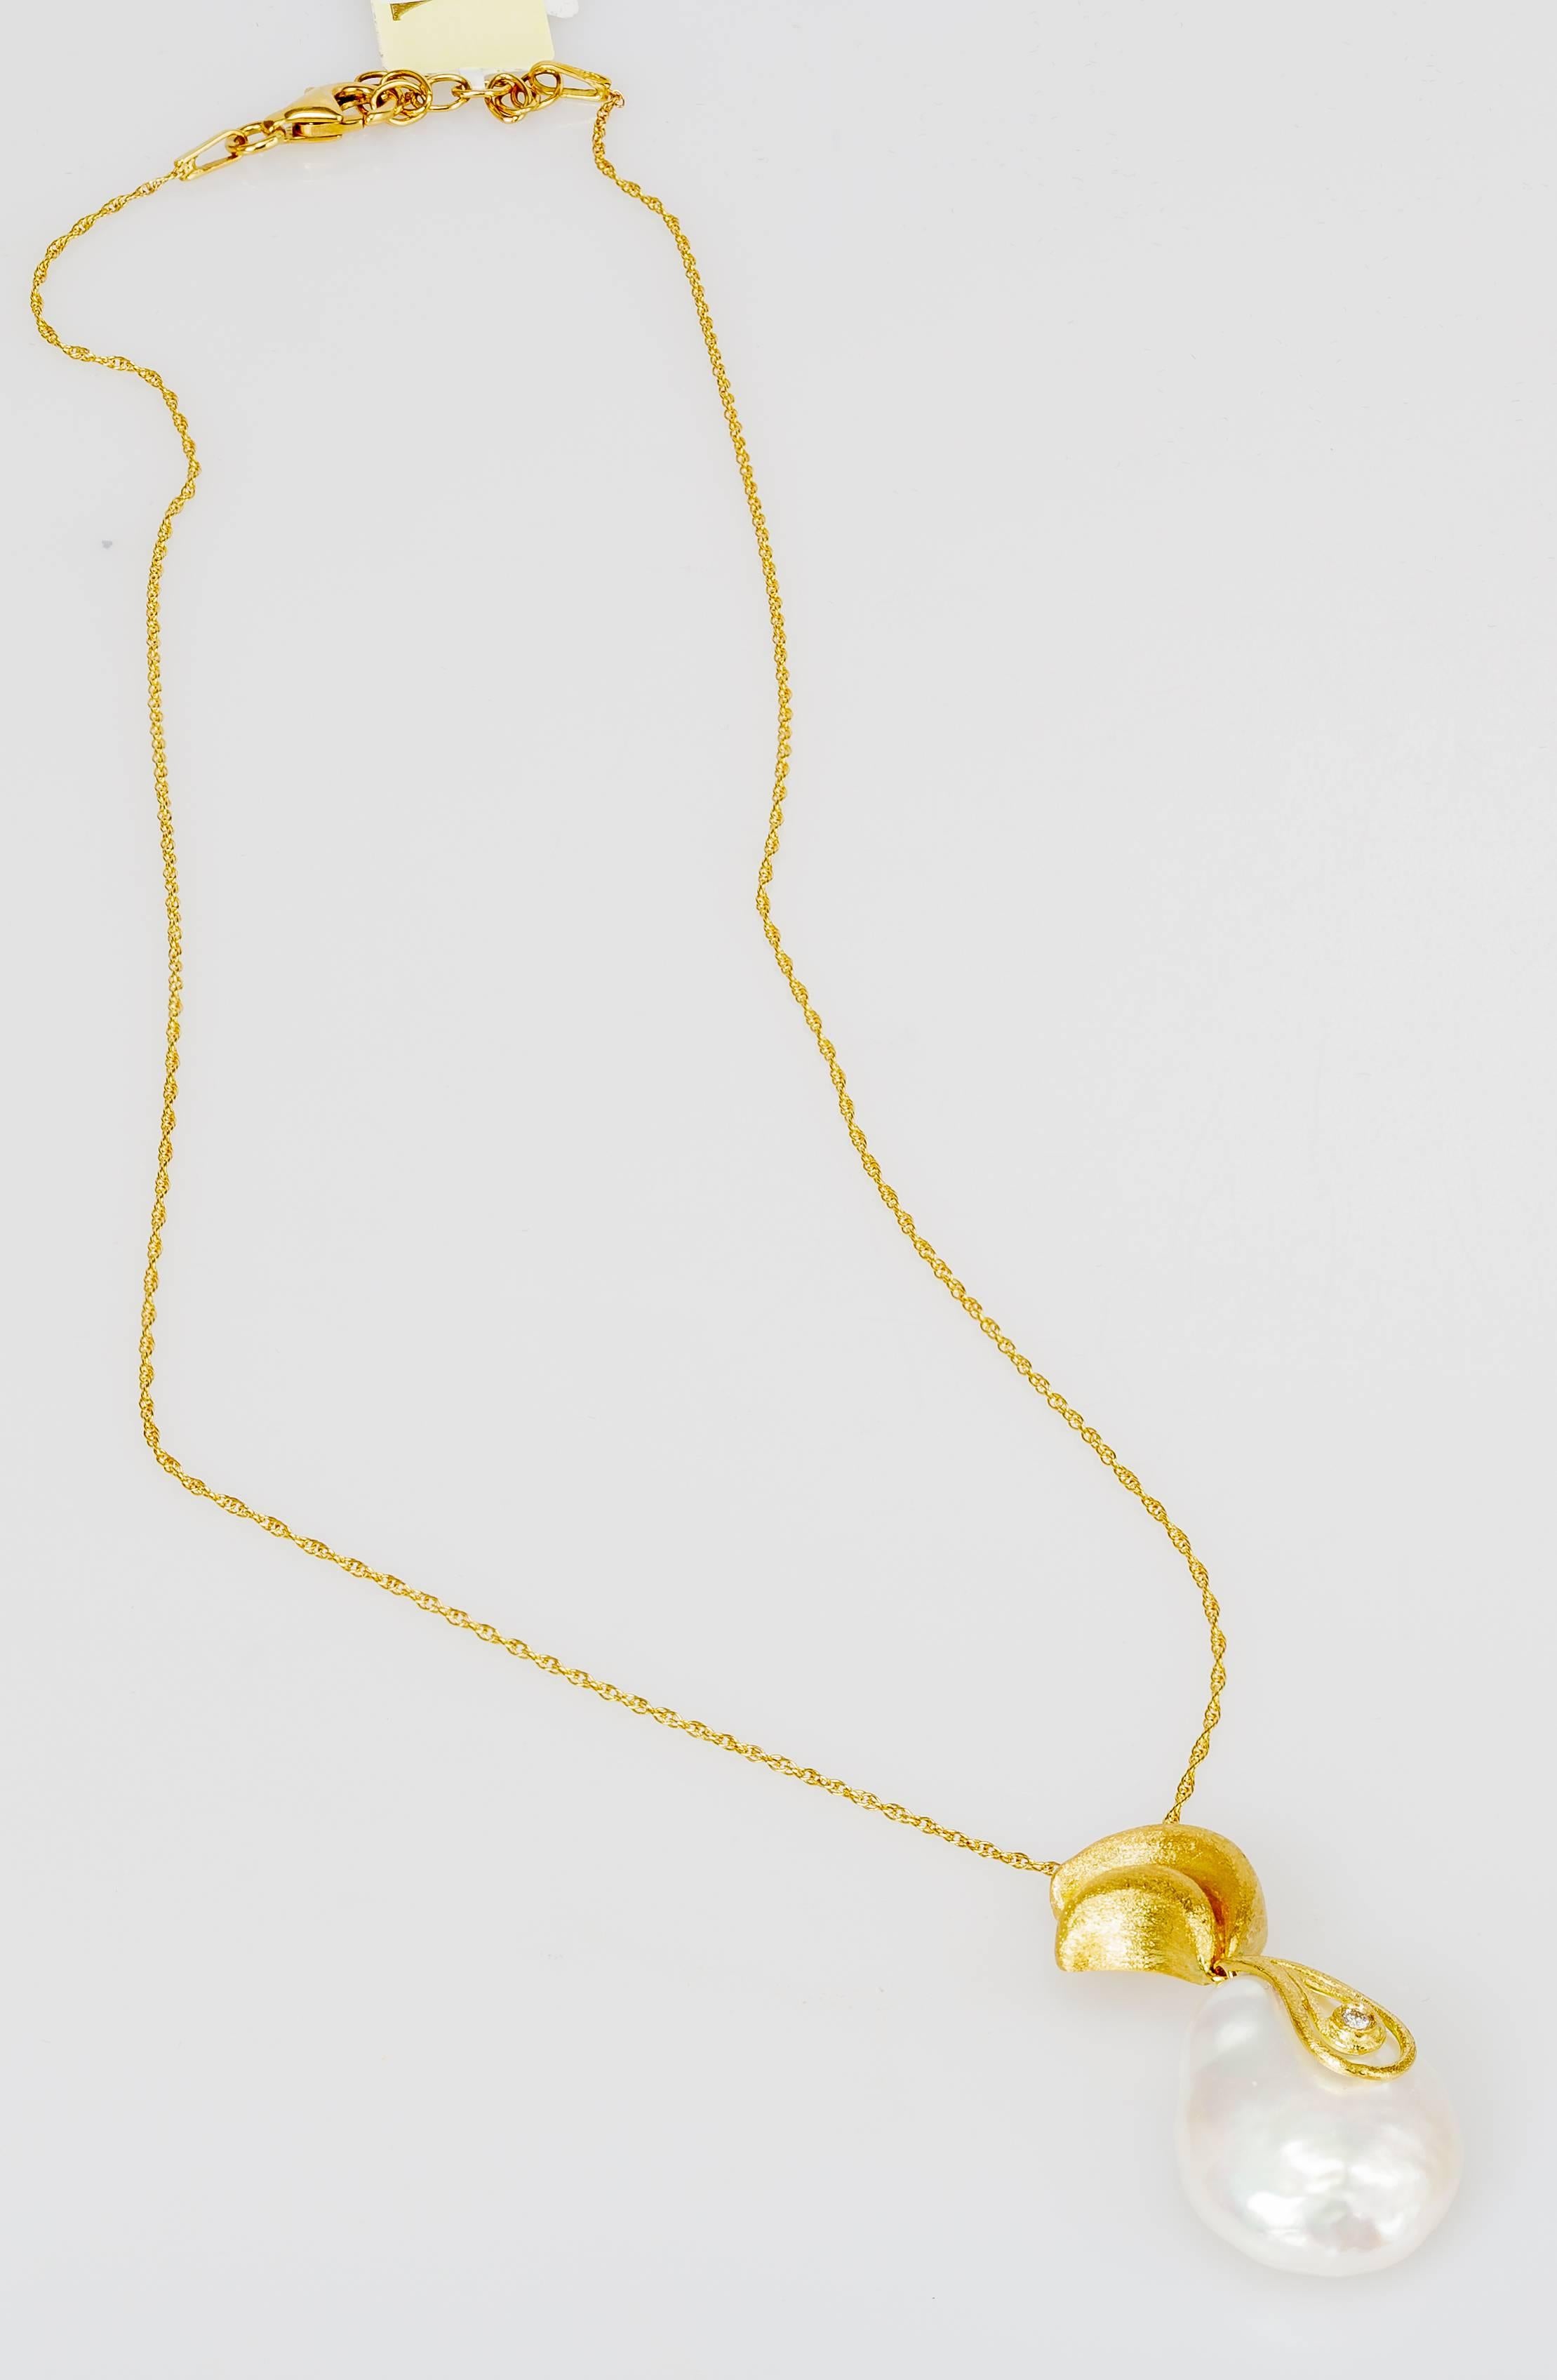 This 18k yellow gold Yvel necklace features a white Baroque pearl on an 18k yellow gold pendant set with a 0.01ct diamond.  The chain measures 16 inches long.